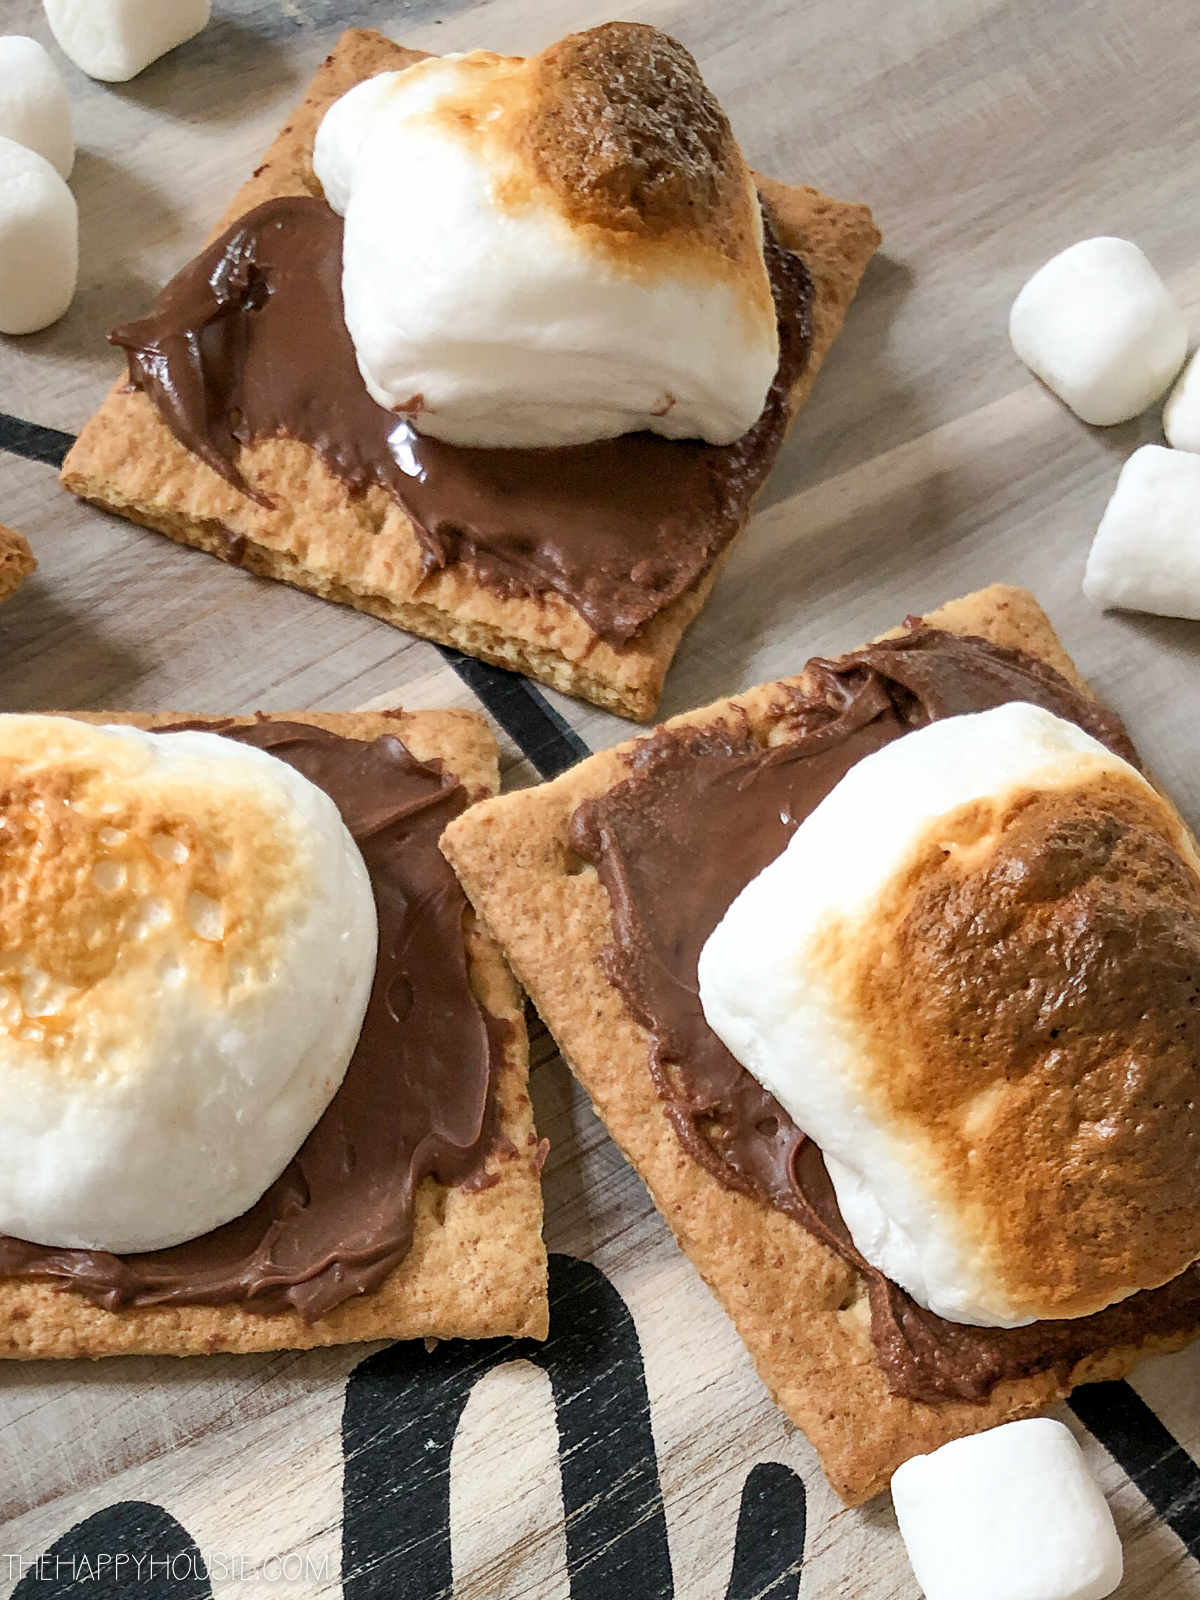 Up close picture of the s'mores on the table.